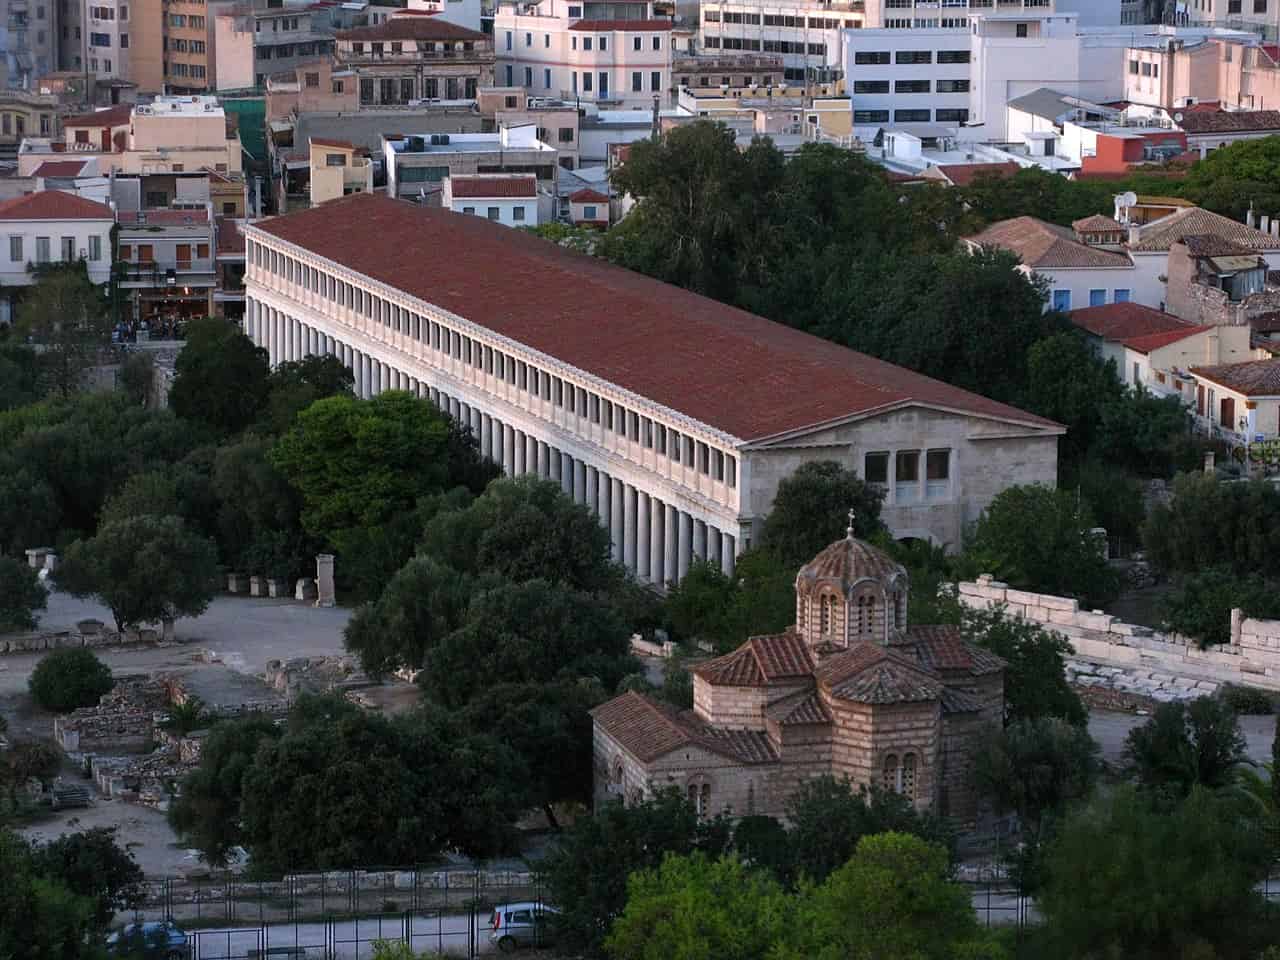 The Stoa of Attalos, as seen from the Court of Cassation (Areopagus, i.e. the "Stone, or Hill, of Ares"